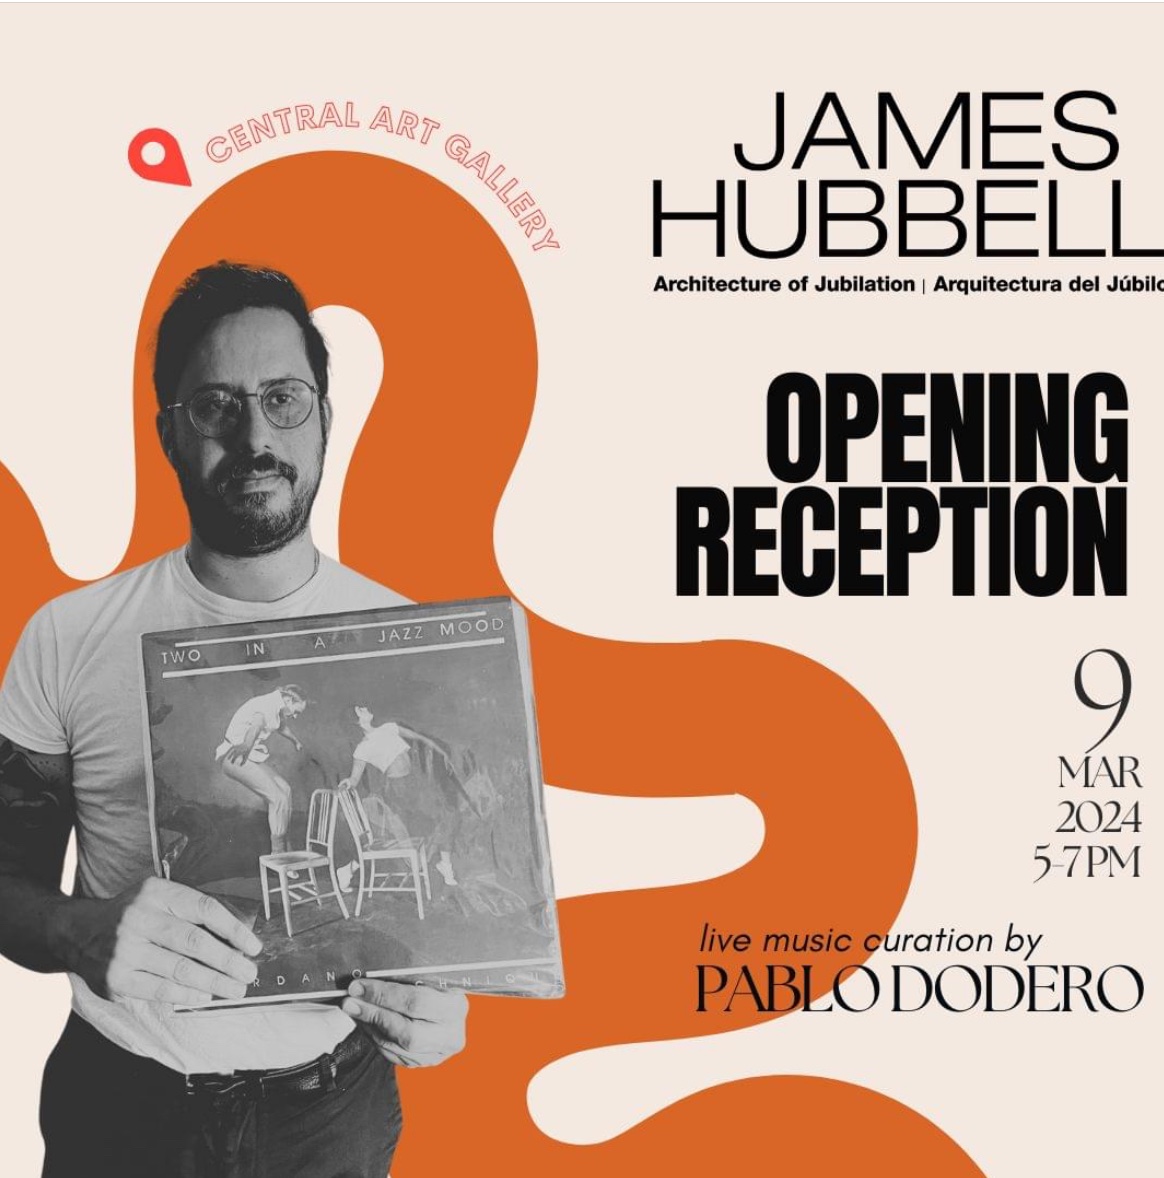 TONIGHT enjoy the Opening Reception | James Hubbell: Architecture of Jubilation! Everyone is invited to the Art Gallery opening this evening, Saturday, March 9. Doors open at 5 p.m. See event details 🔗 sandiego.librarymarket.com/event/opening-…